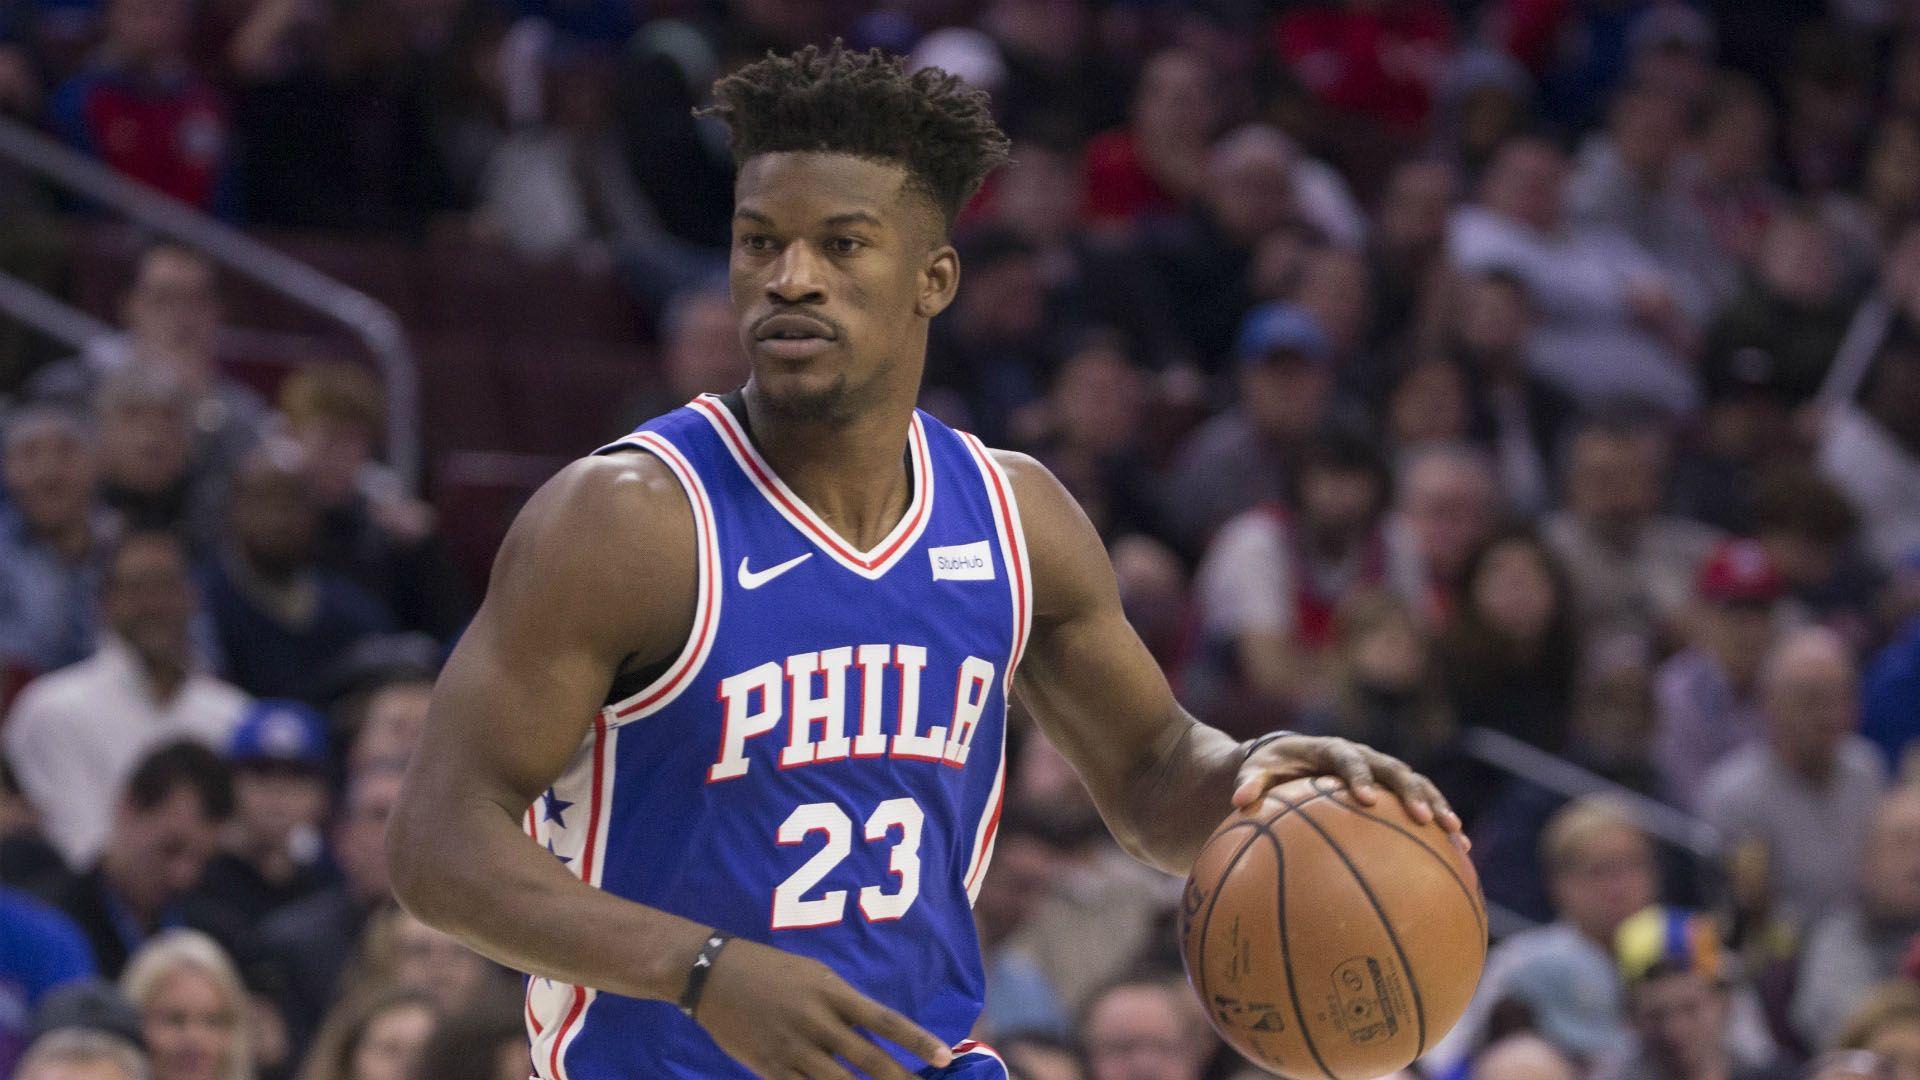 Jimmy Butler is happy the 76ers topped the Timberwolves on Tuesday